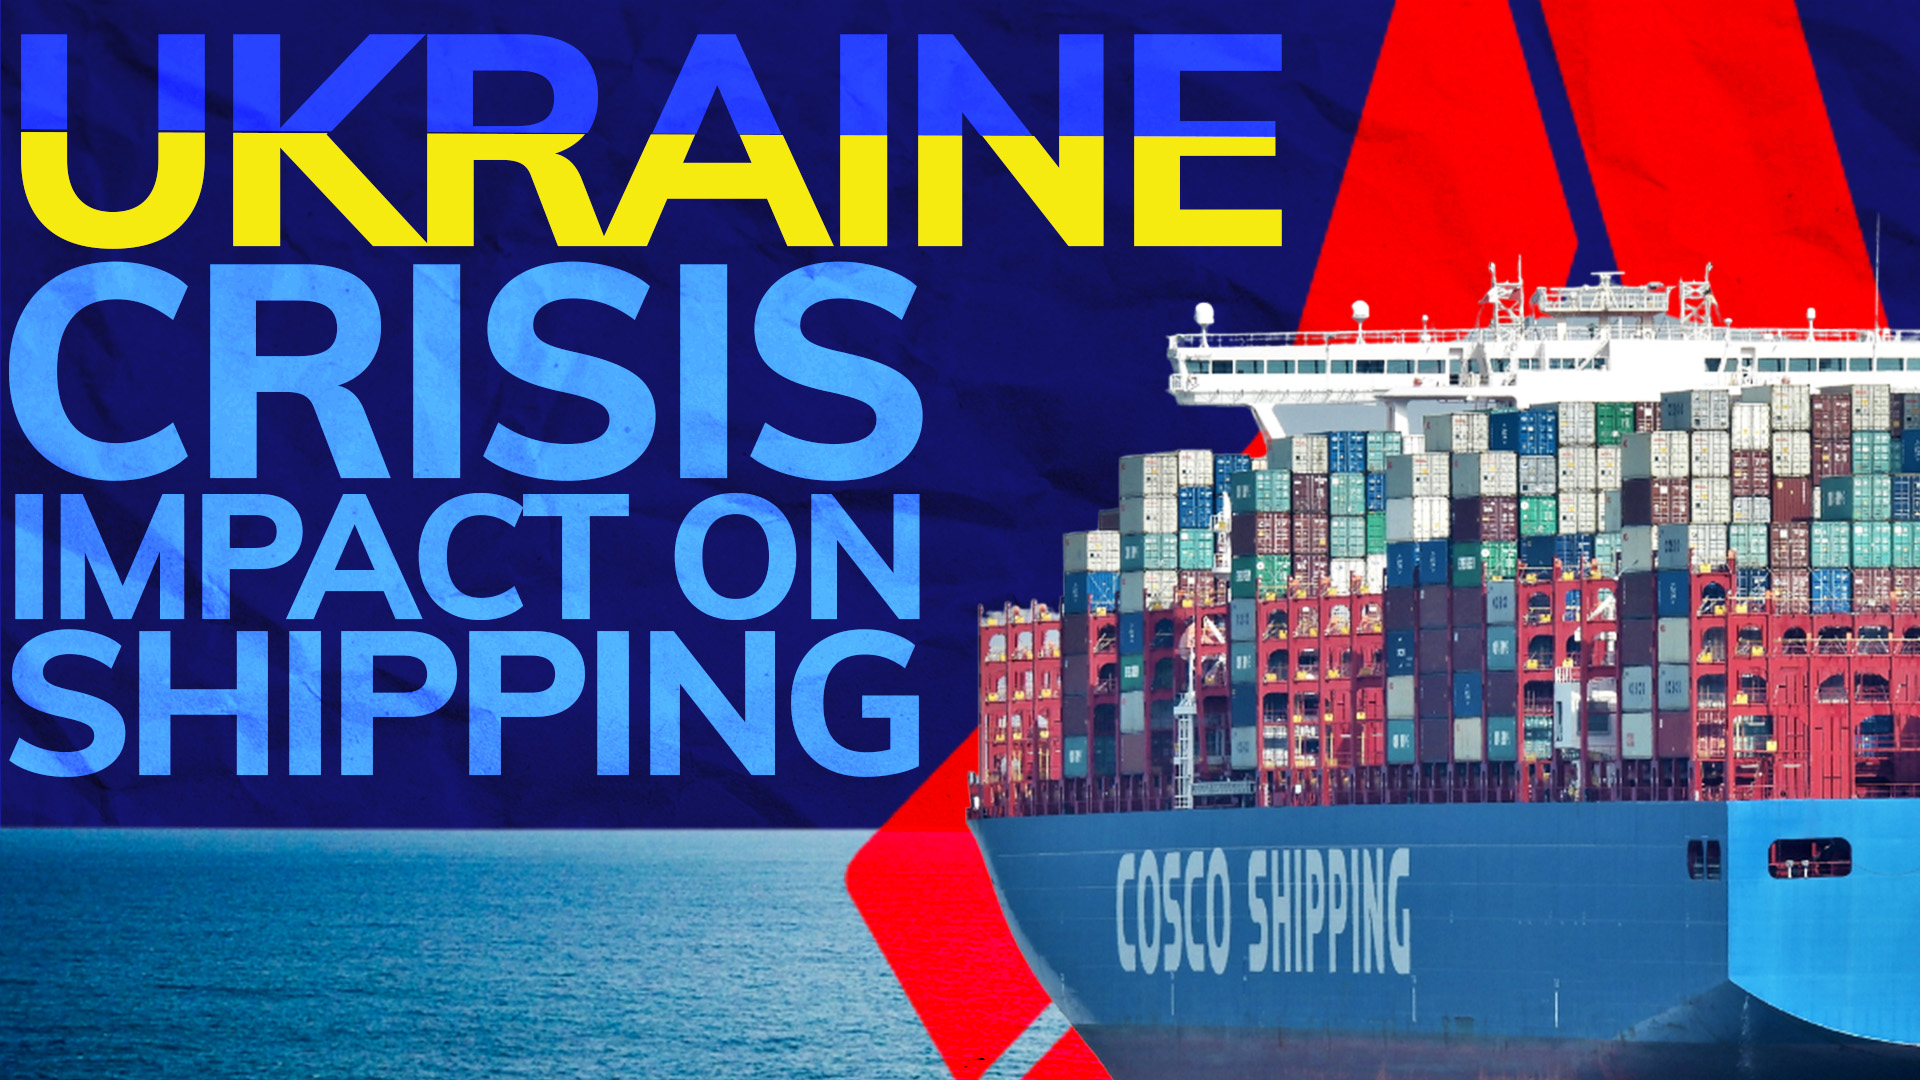 Russia's invasion of Ukraine is impacting air and sea freight within the region